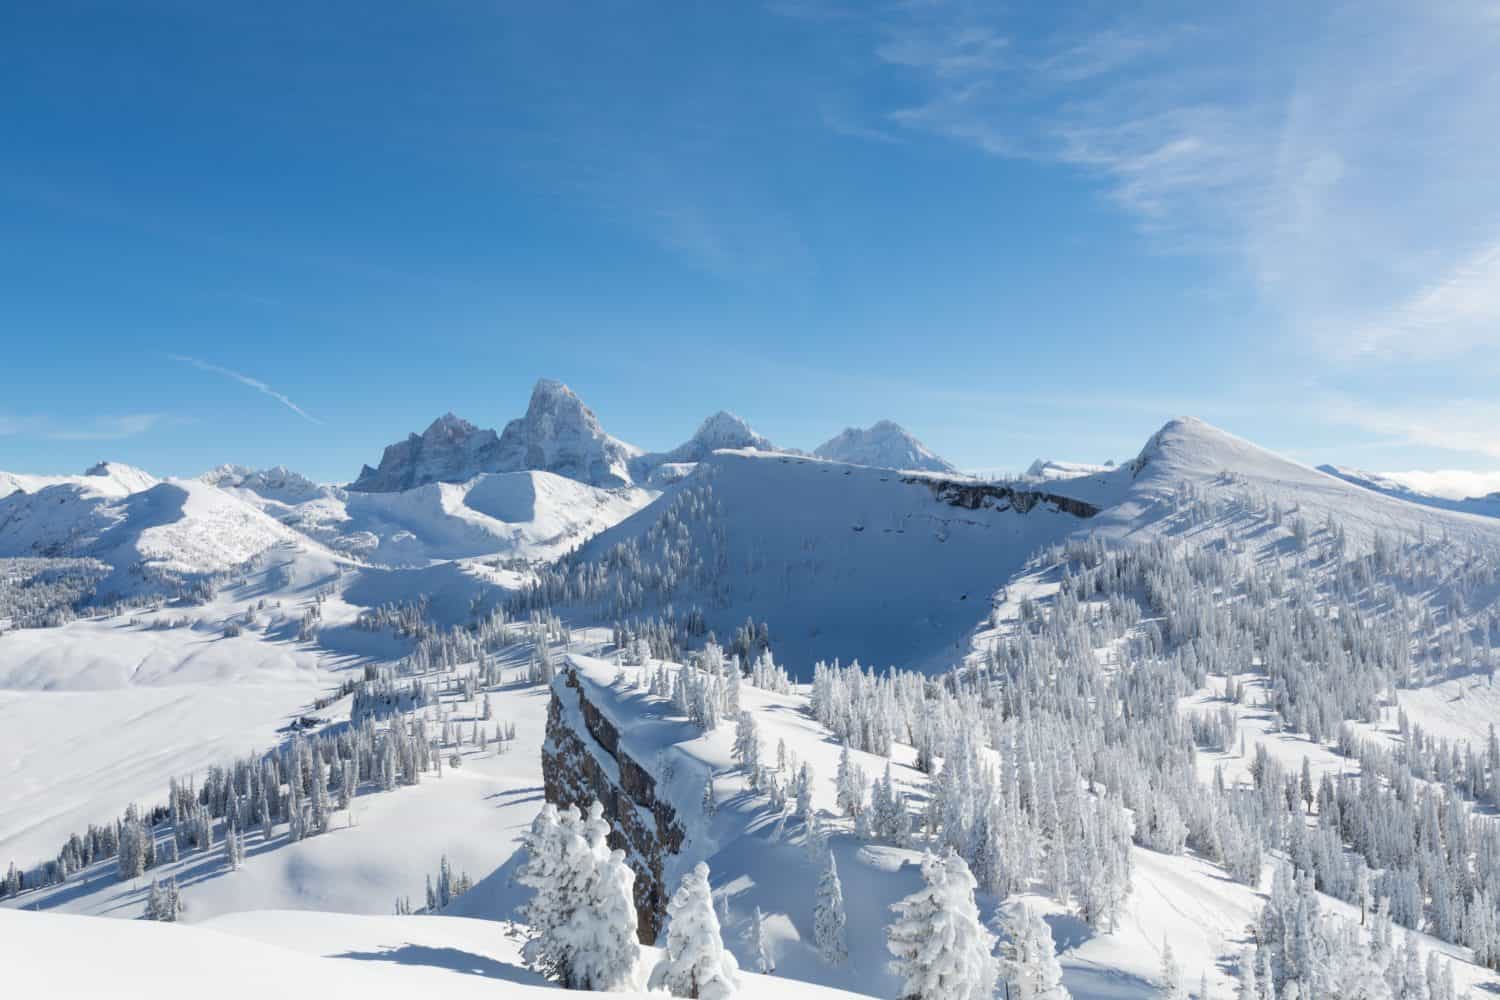 Grand Targhee Resort is a ski resort in the western United States, located in western Wyoming in the Caribou-Targhee National Forest, near Alta, the closest town to the resort.